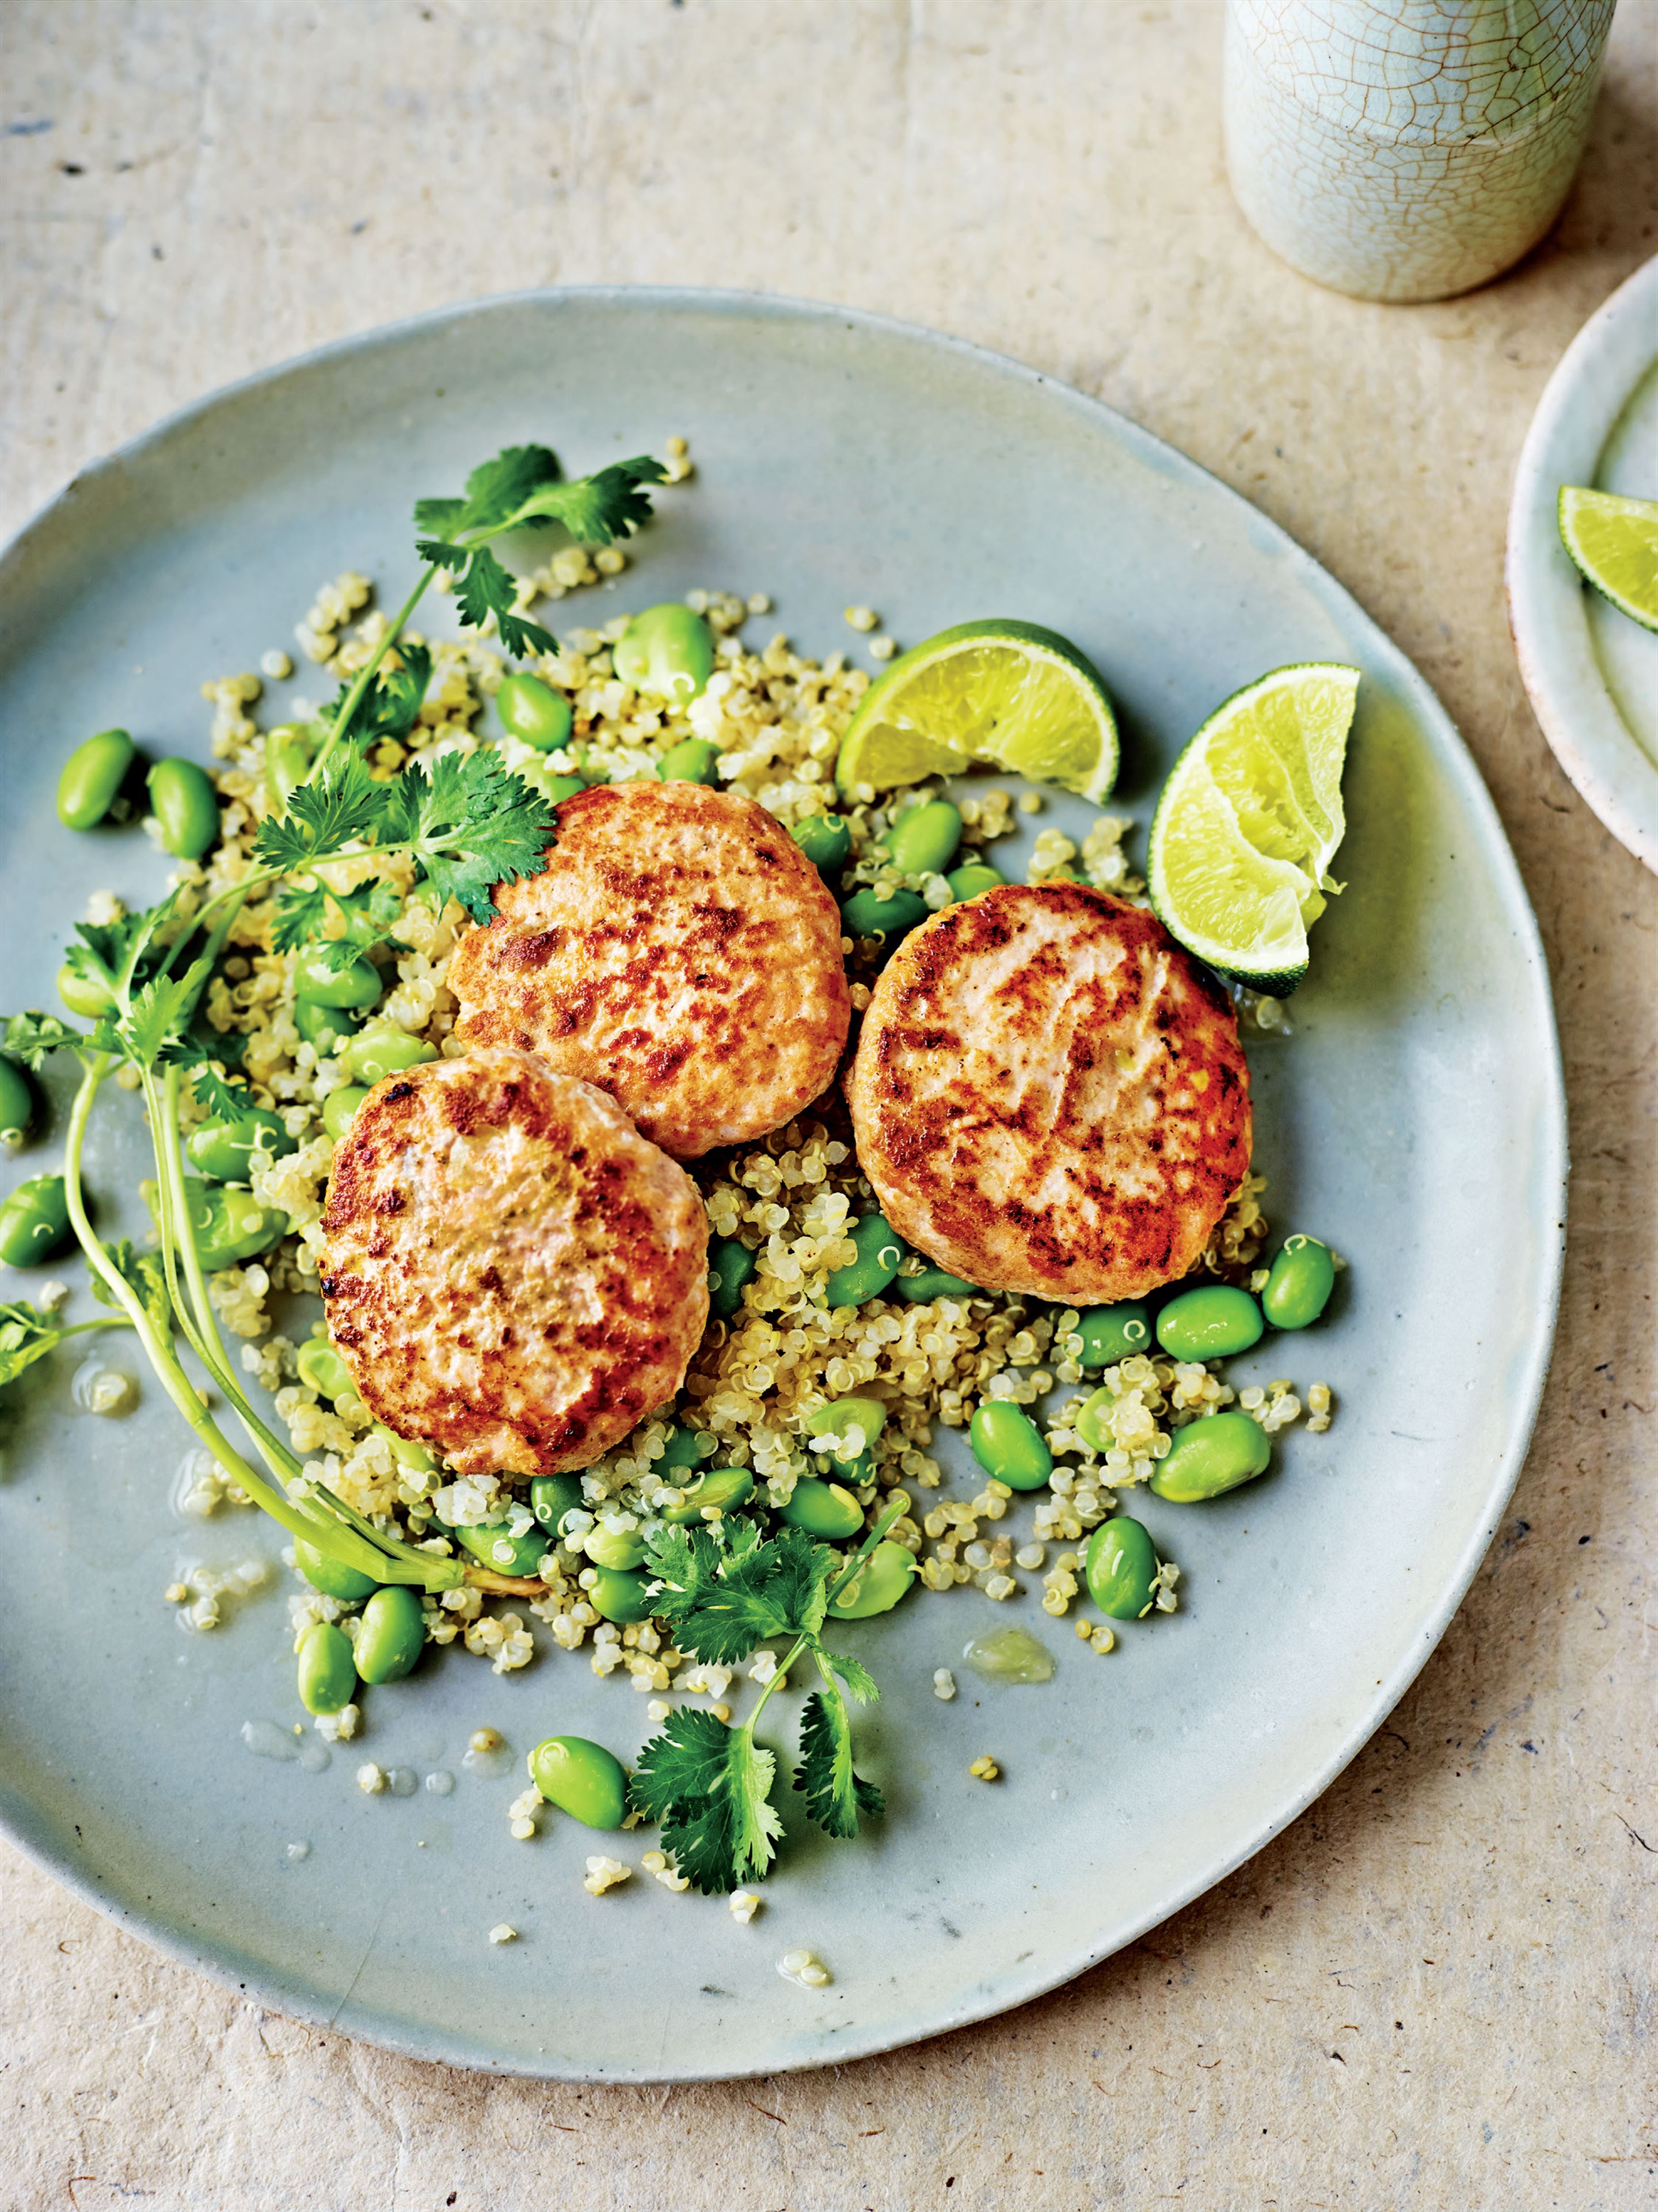 Green curry salmon burgers with edamame quinoa